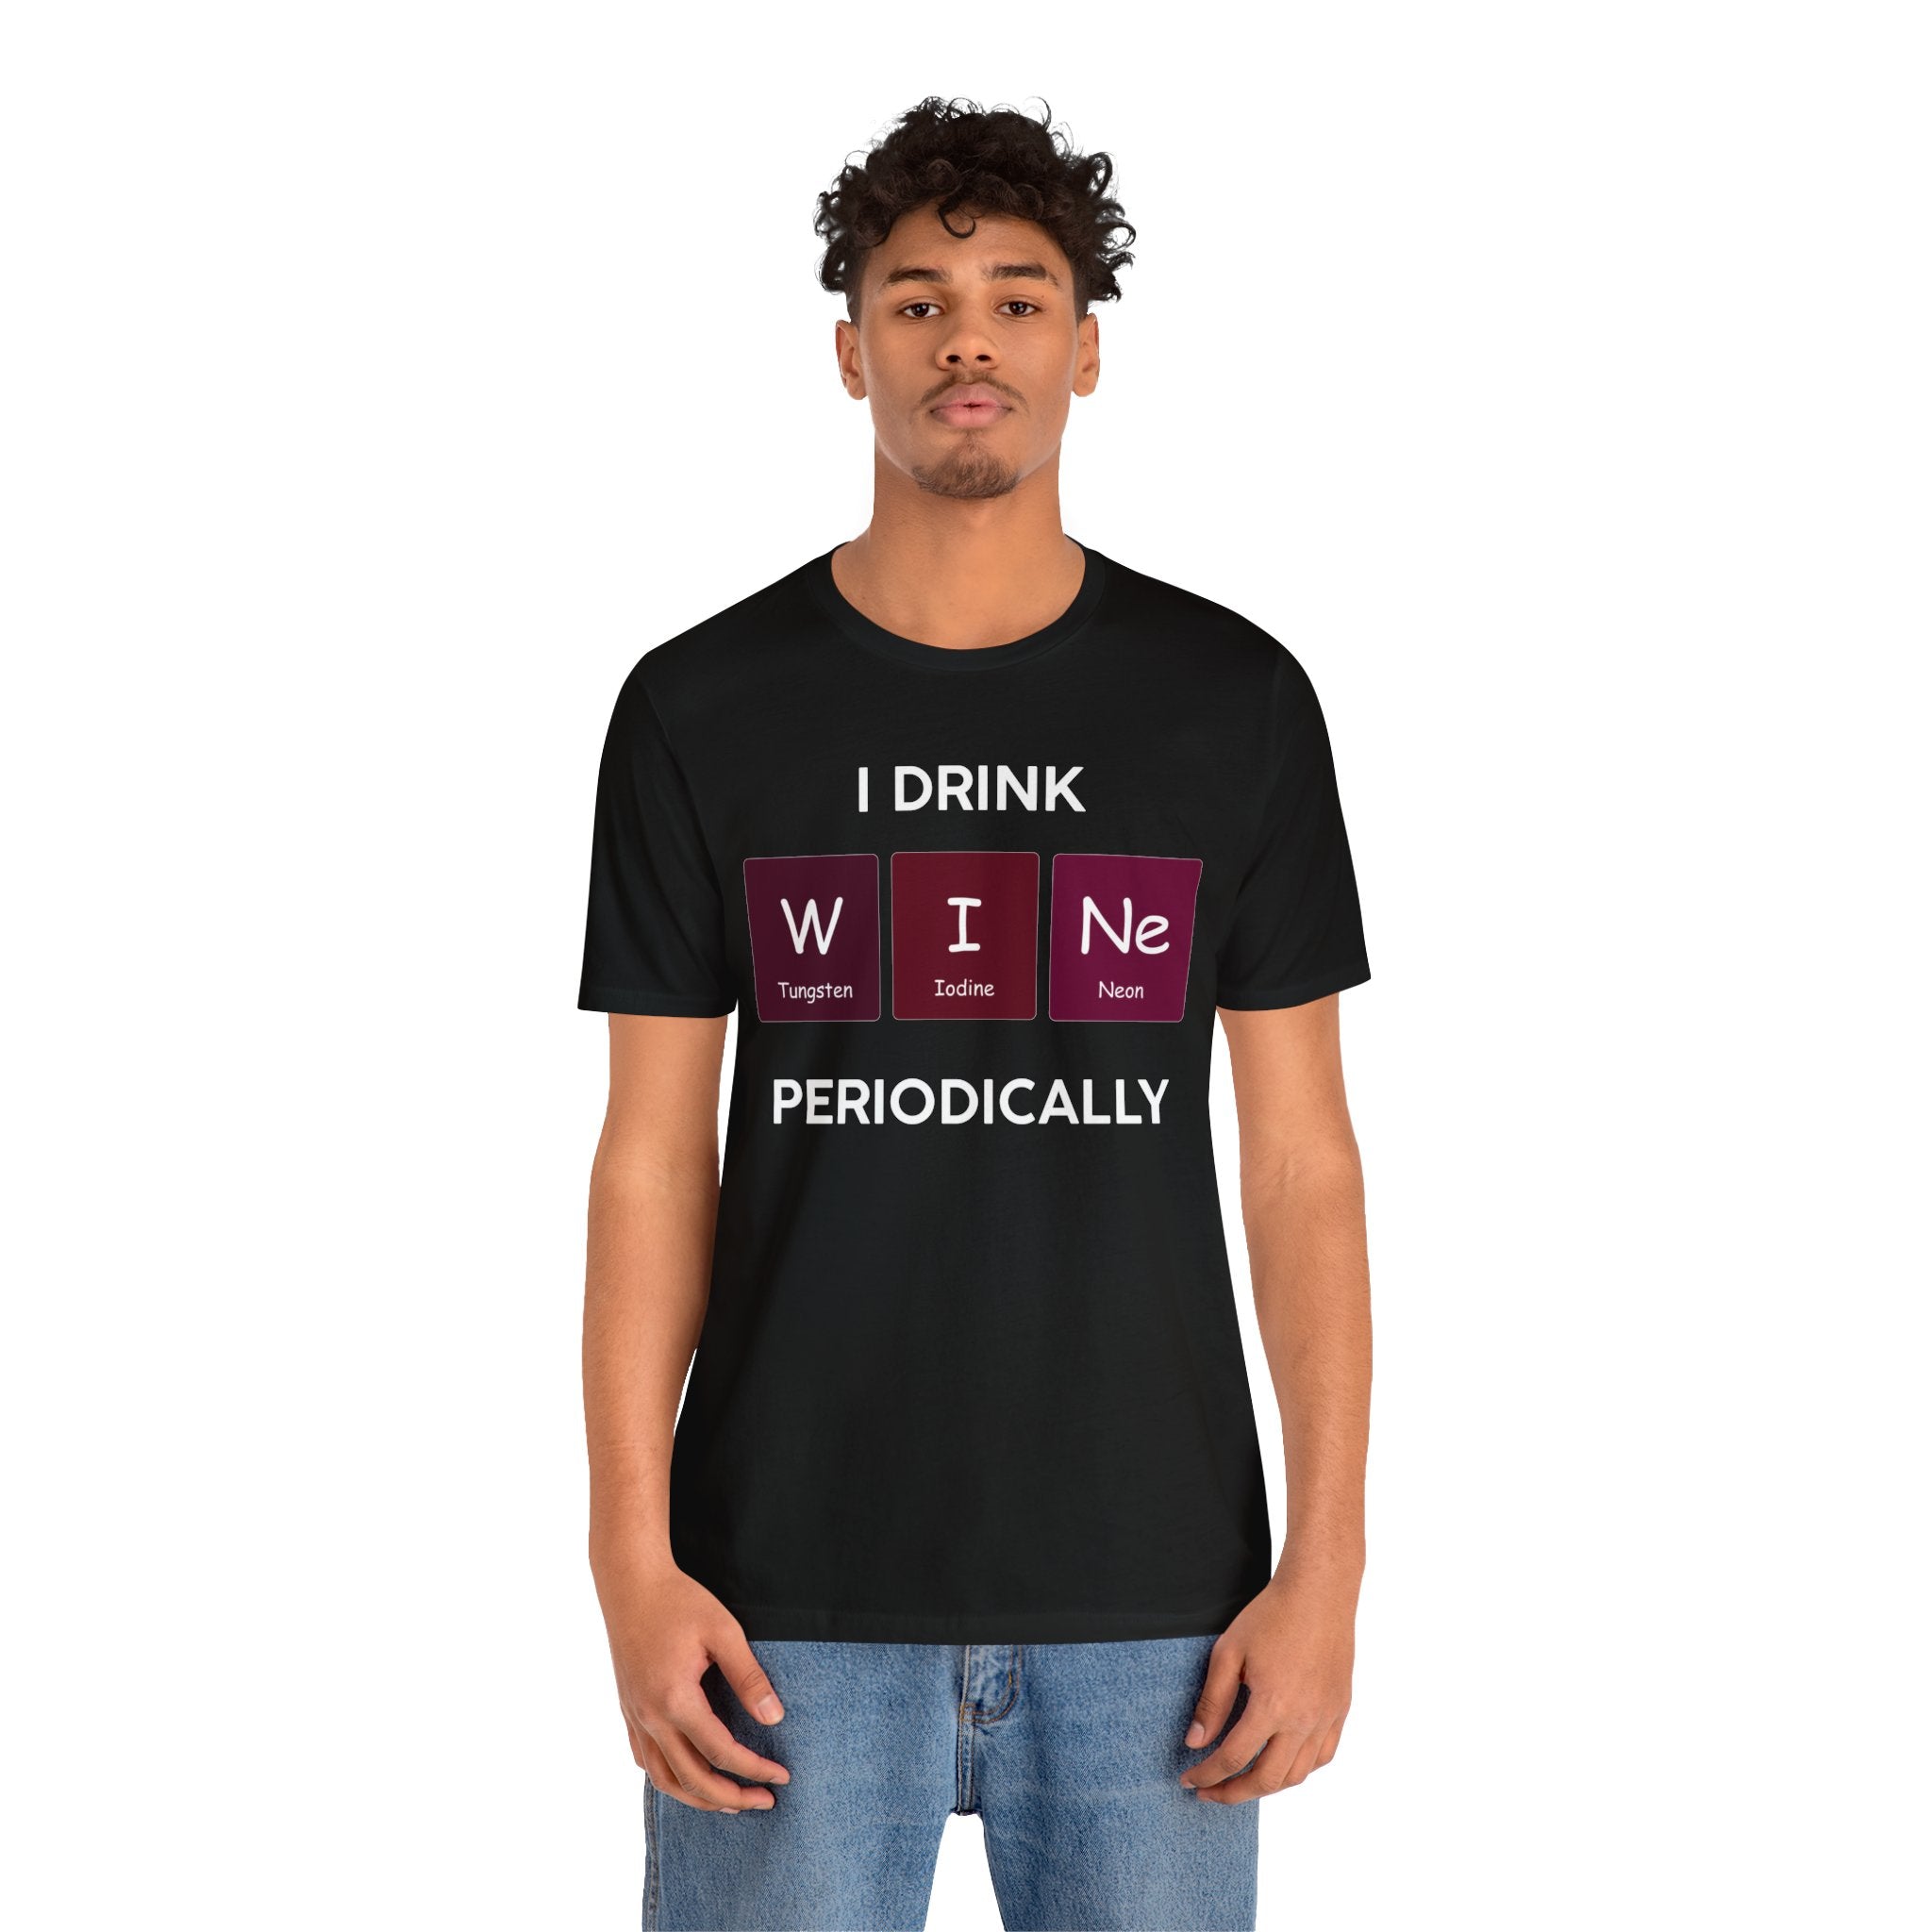 Young man wearing a black unisex jersey tee with a quality print saying "I Drink W-I-Ne" using elements from the periodic table.